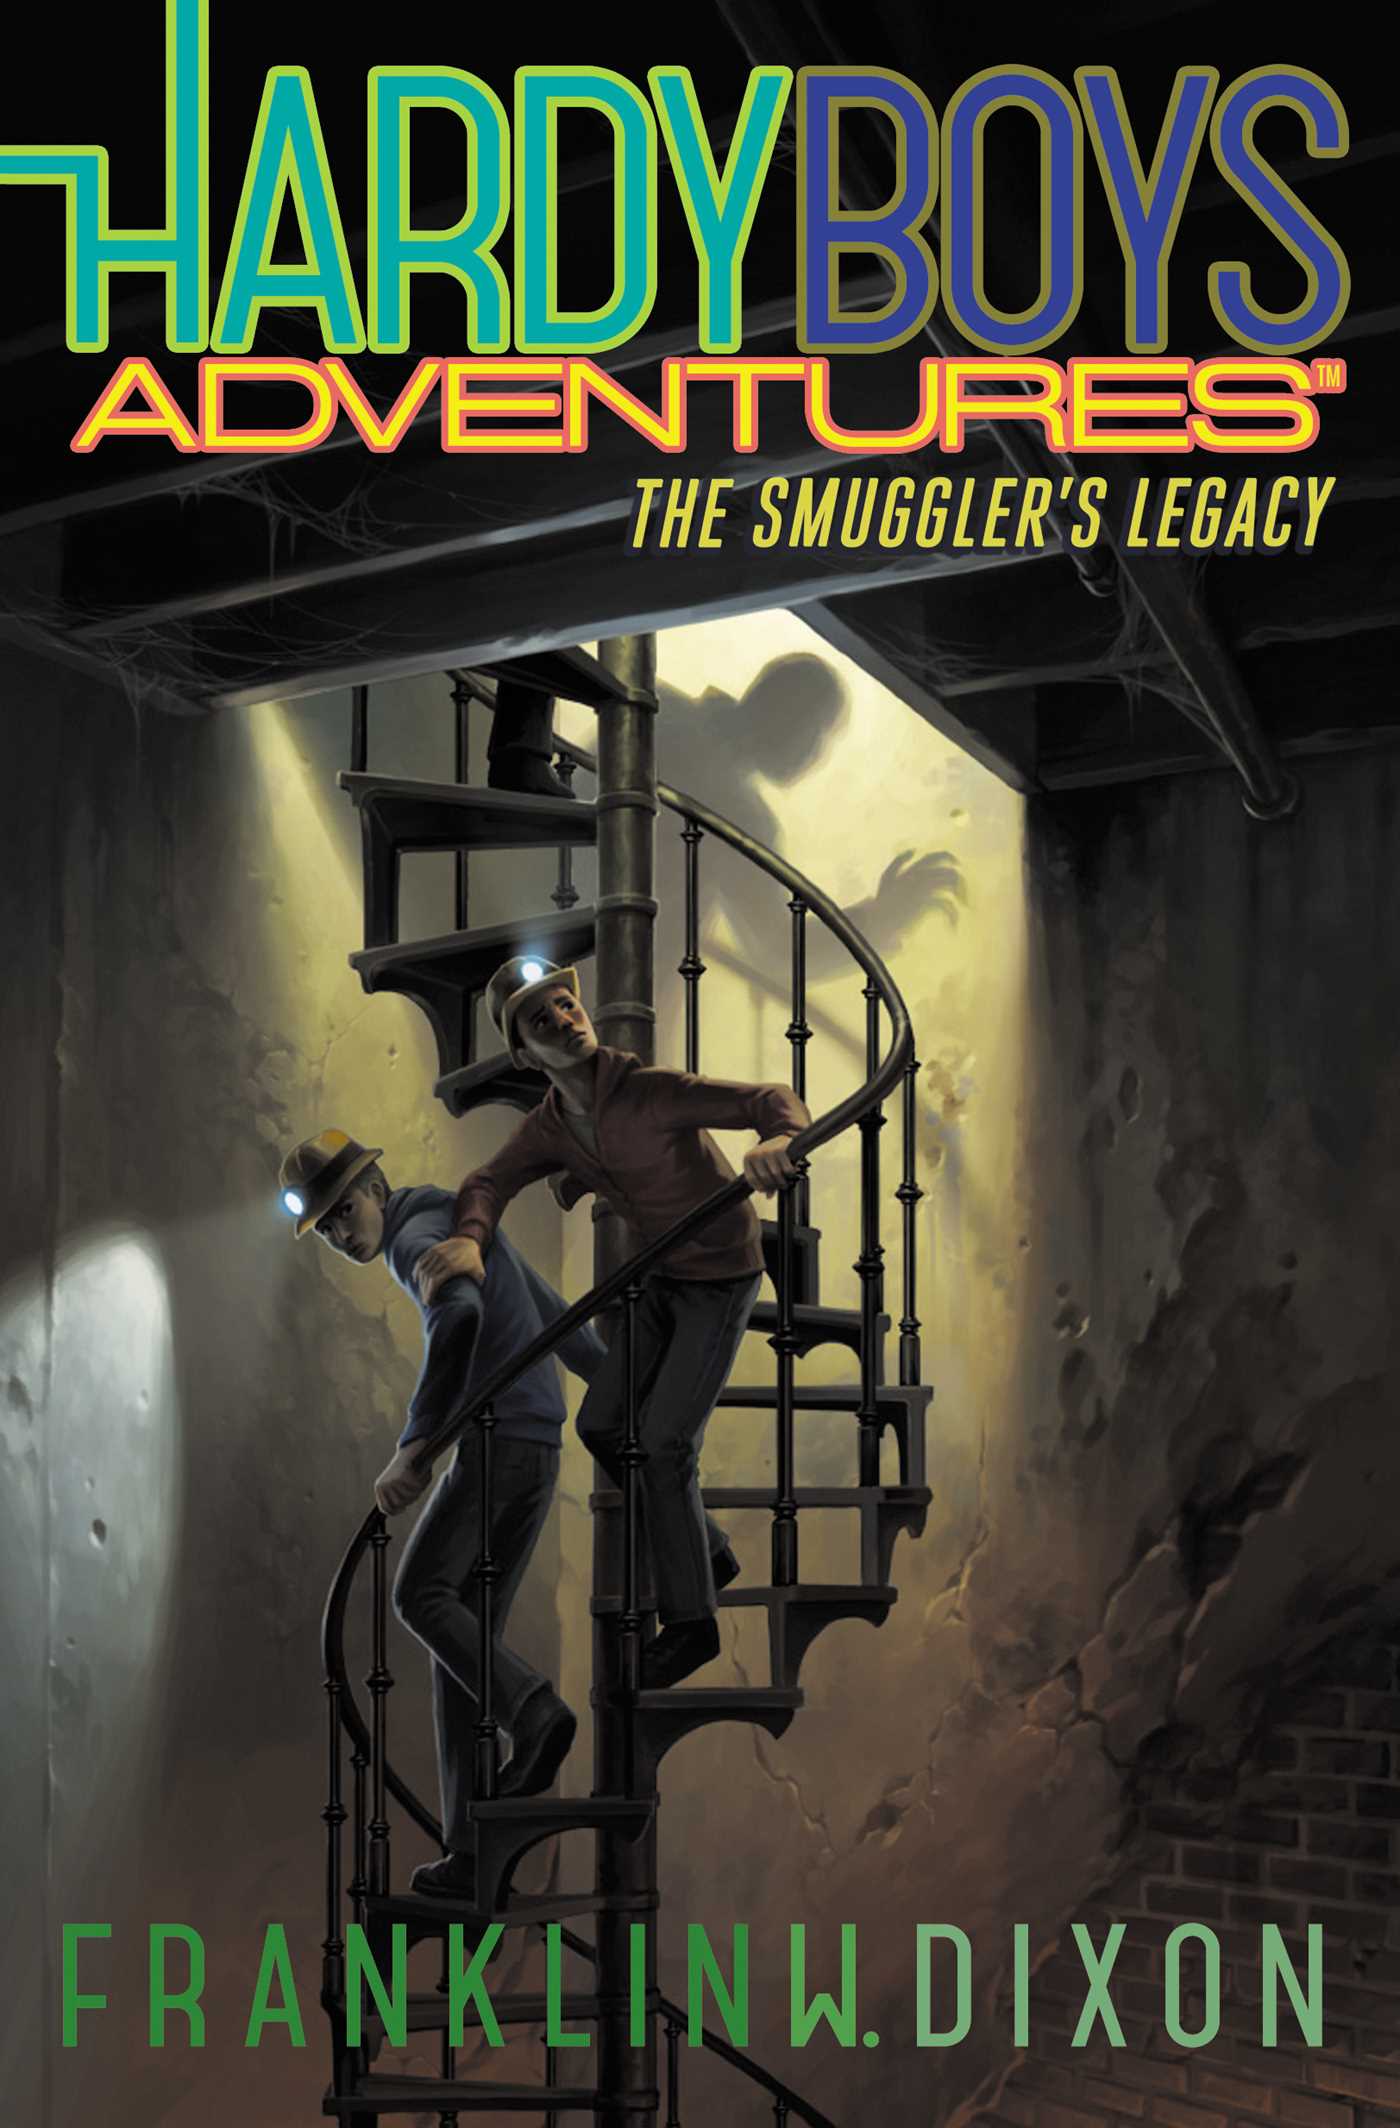 Hardy Boys Adventures #25 The Smuggler’s Legacy ~ Cover Art, Synopsis, Details